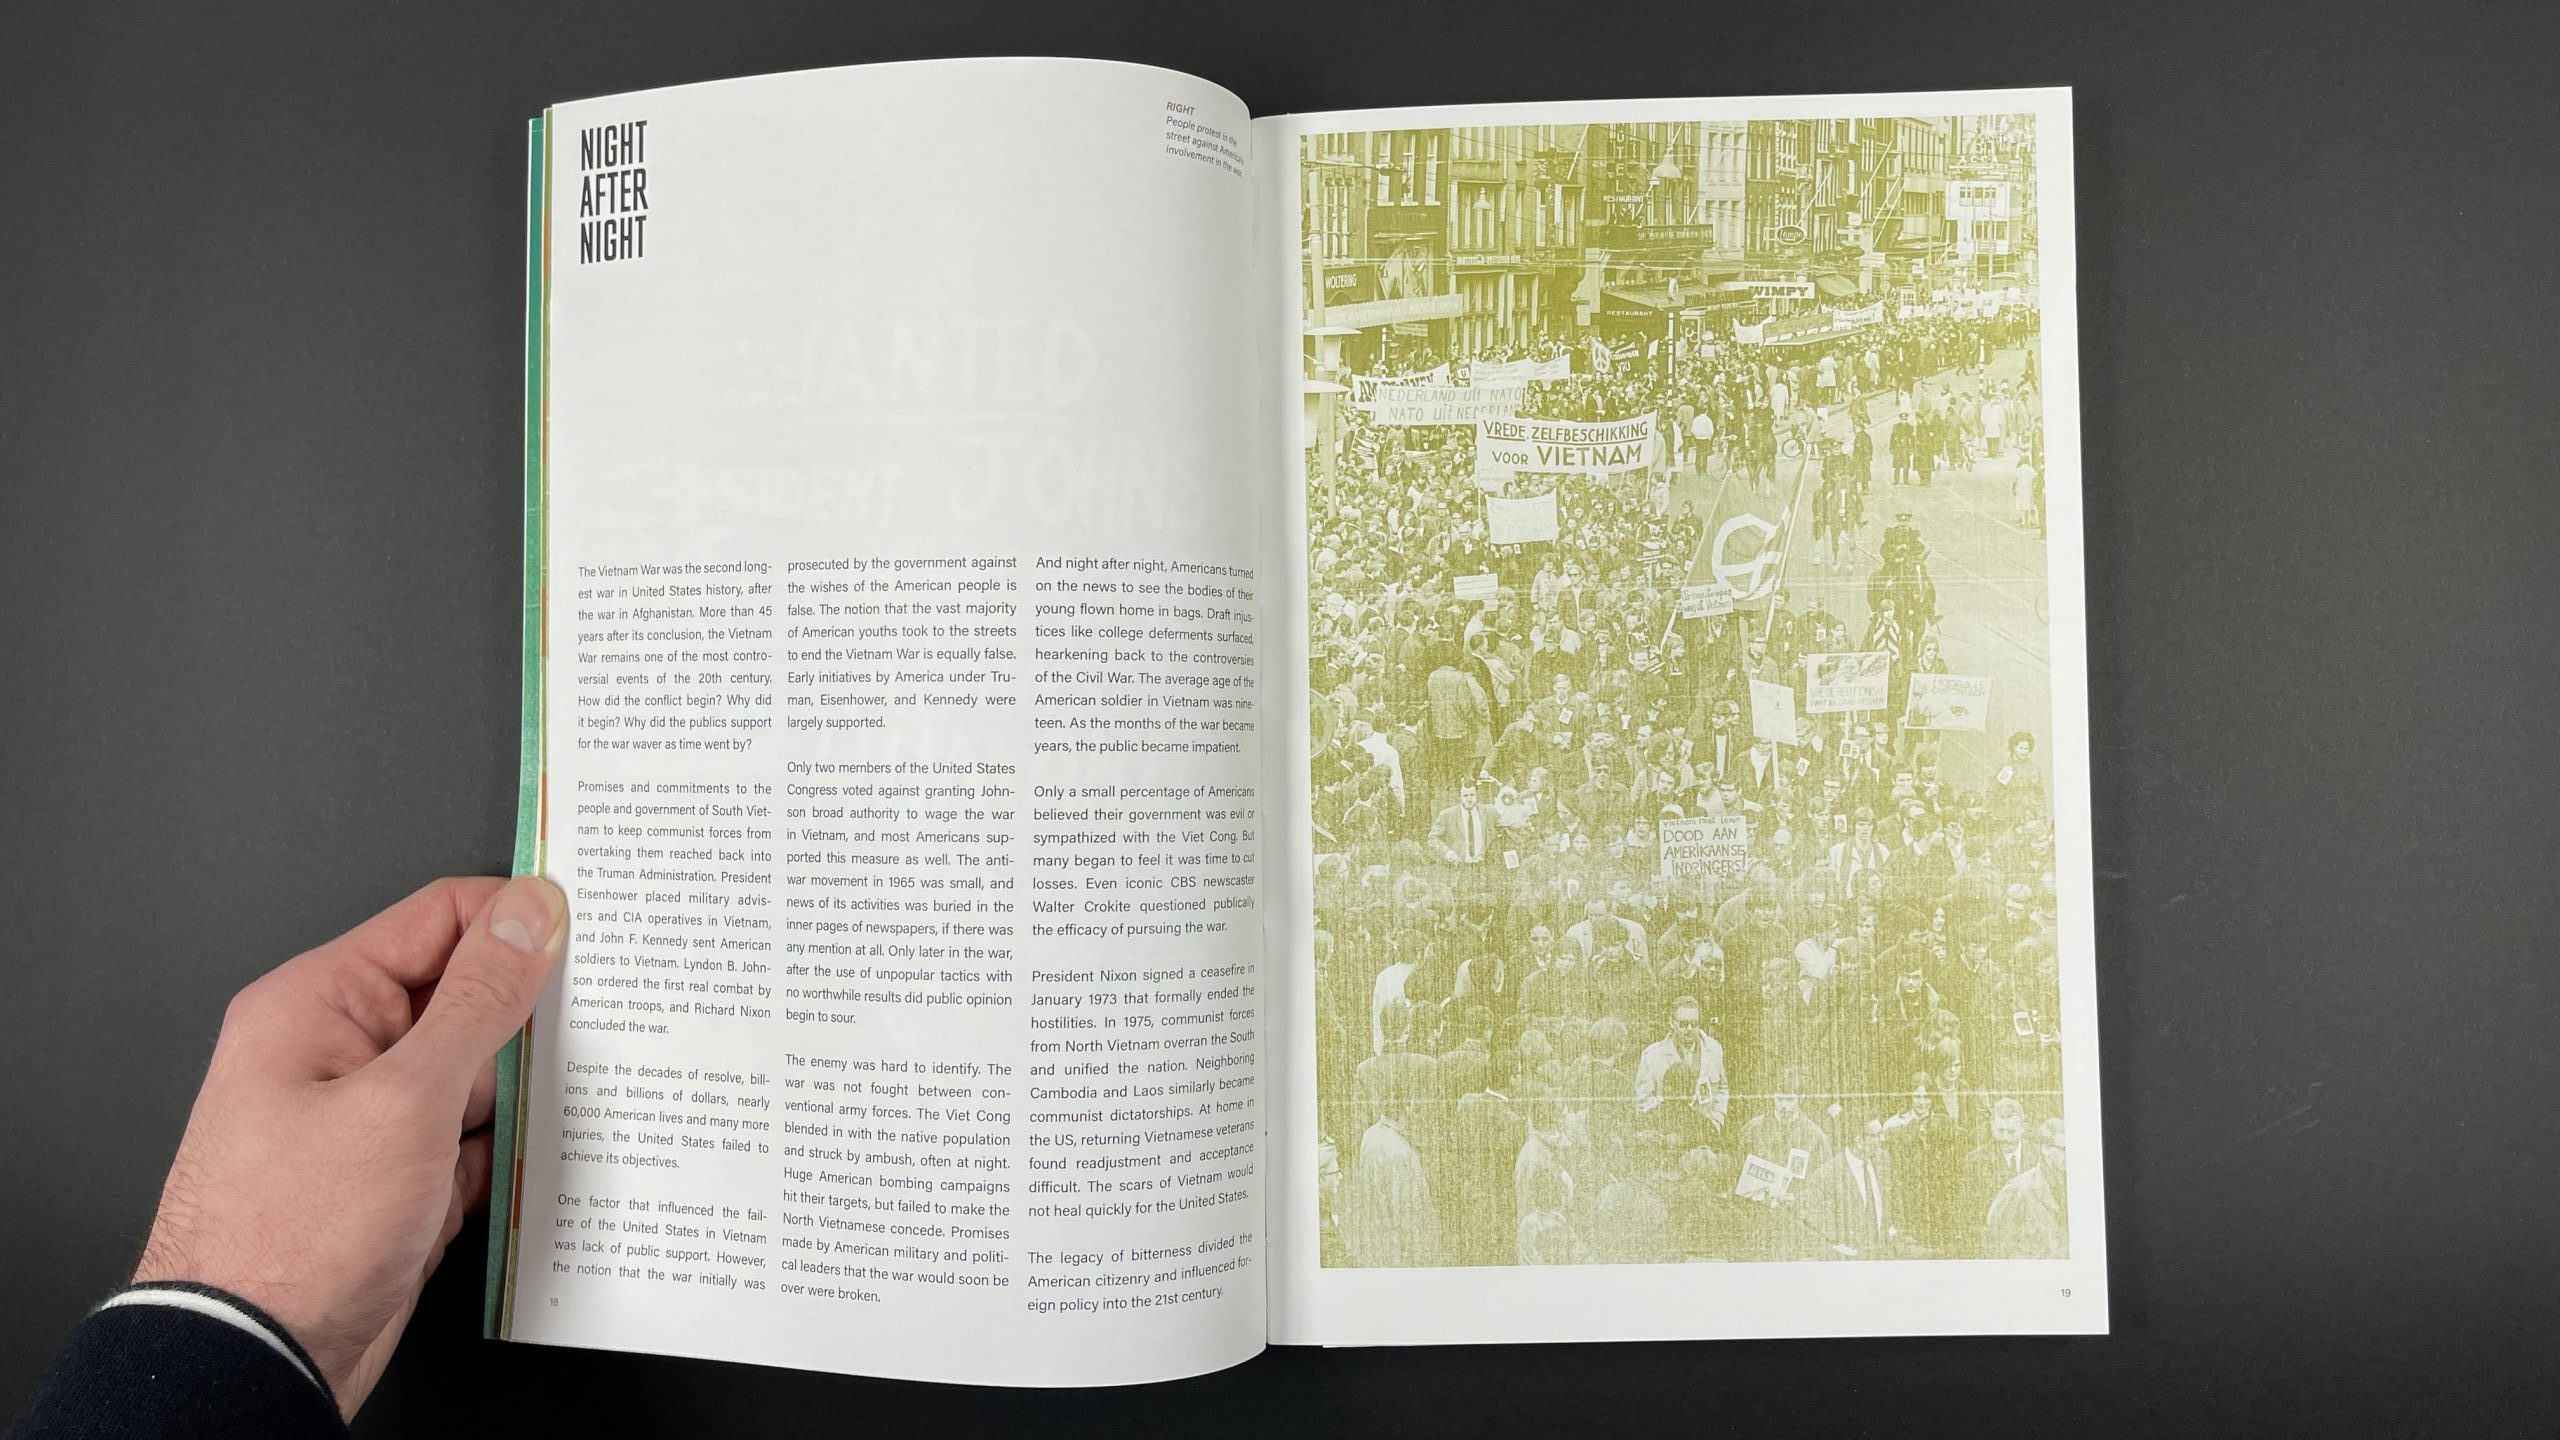 Voices of Dissent: A Visual History of Anti-Vietnam War Protests